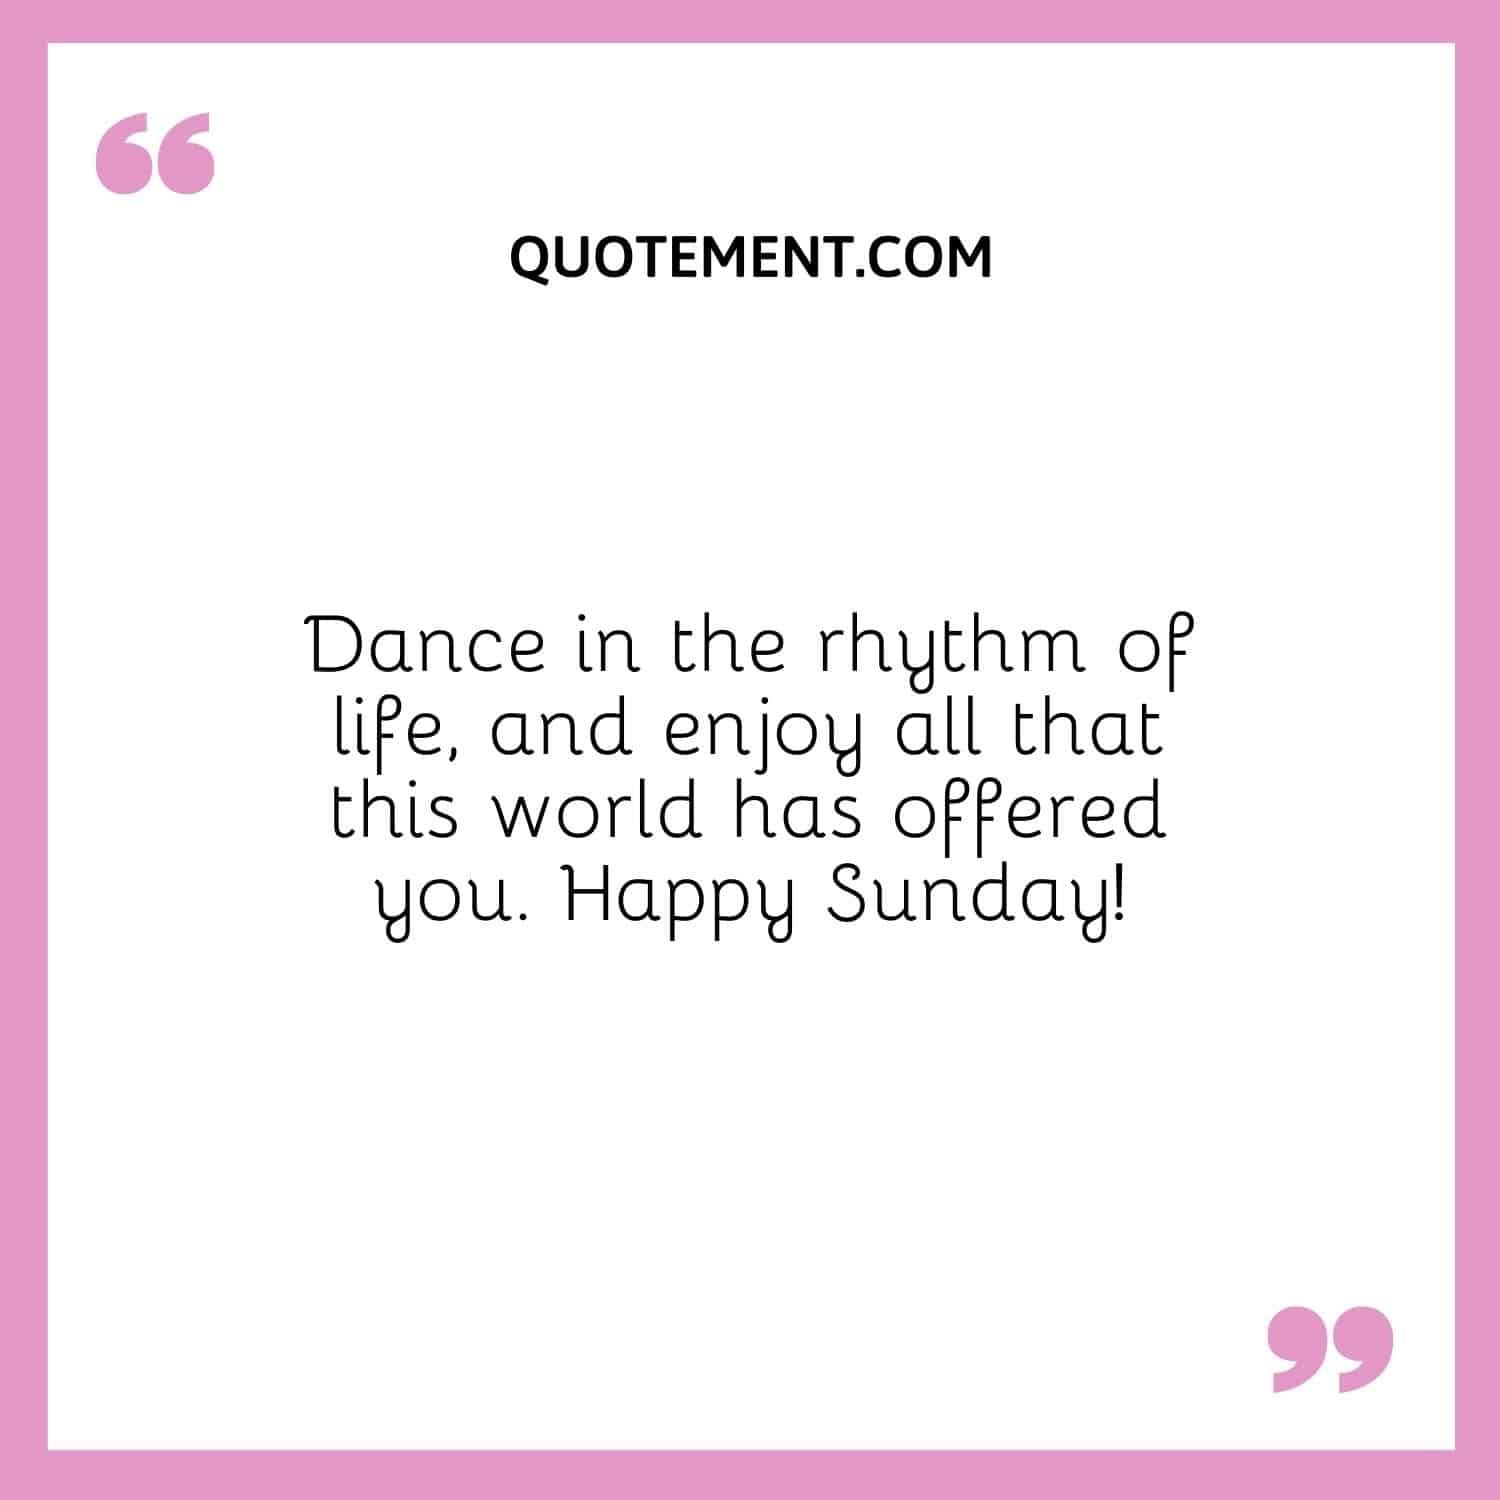 Dance in the rhythm of life, and enjoy all that this world has offered you